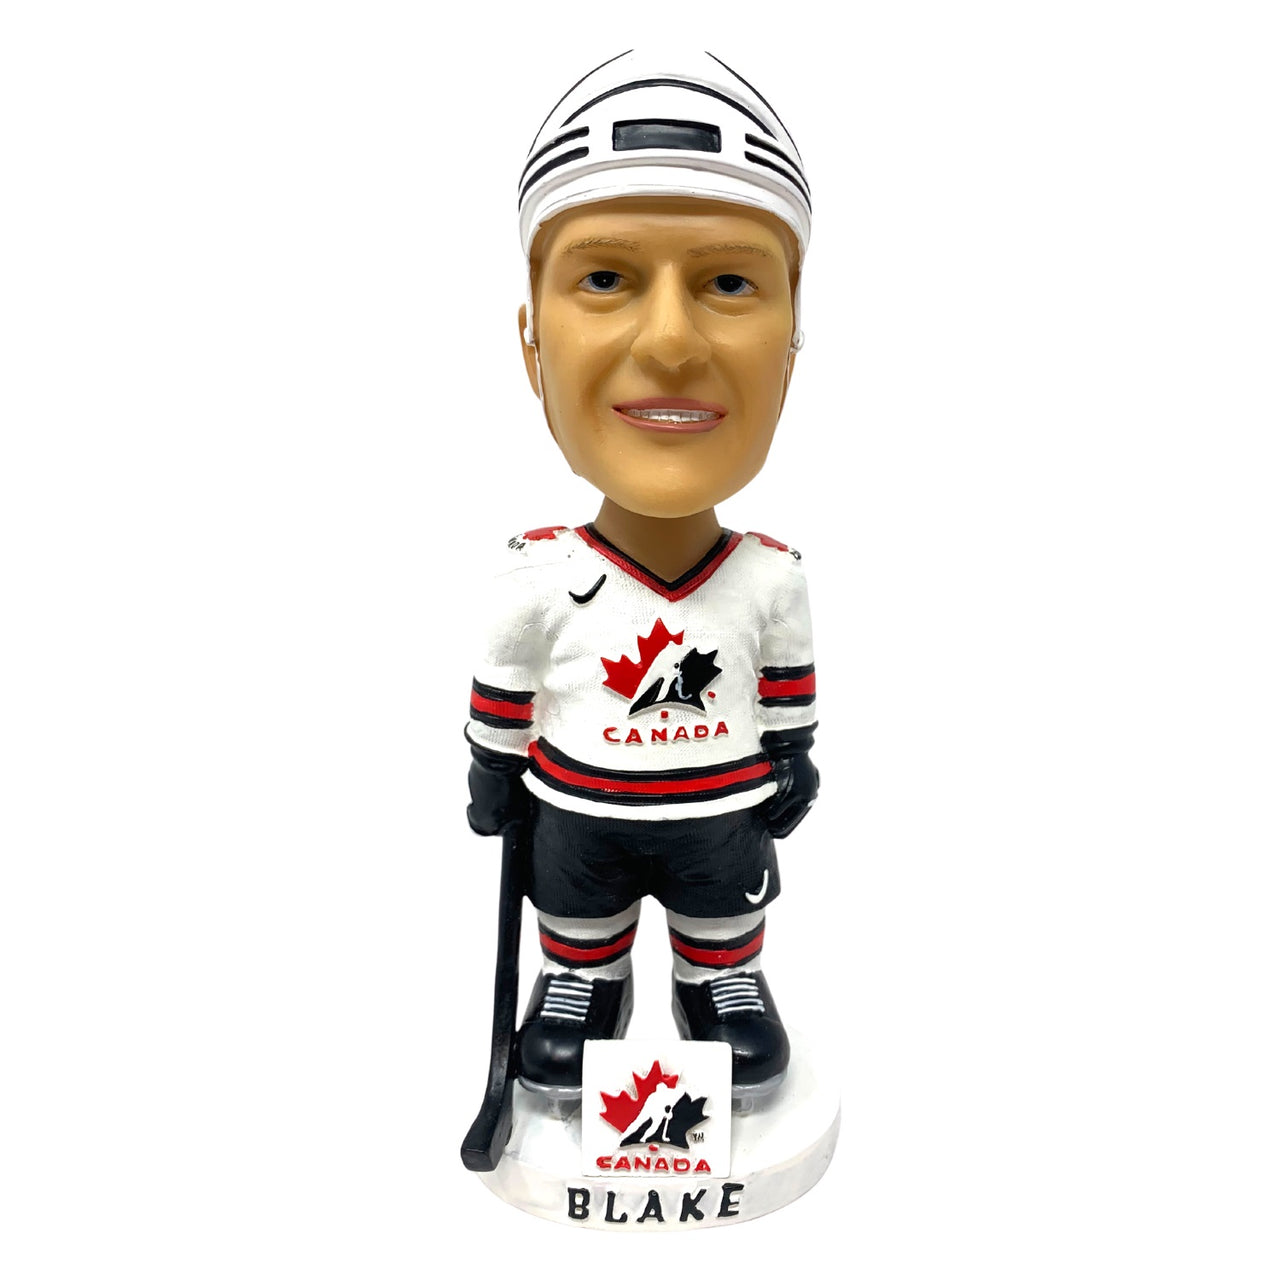 Blake Canadian Hockey Player Bobble Head Collectible